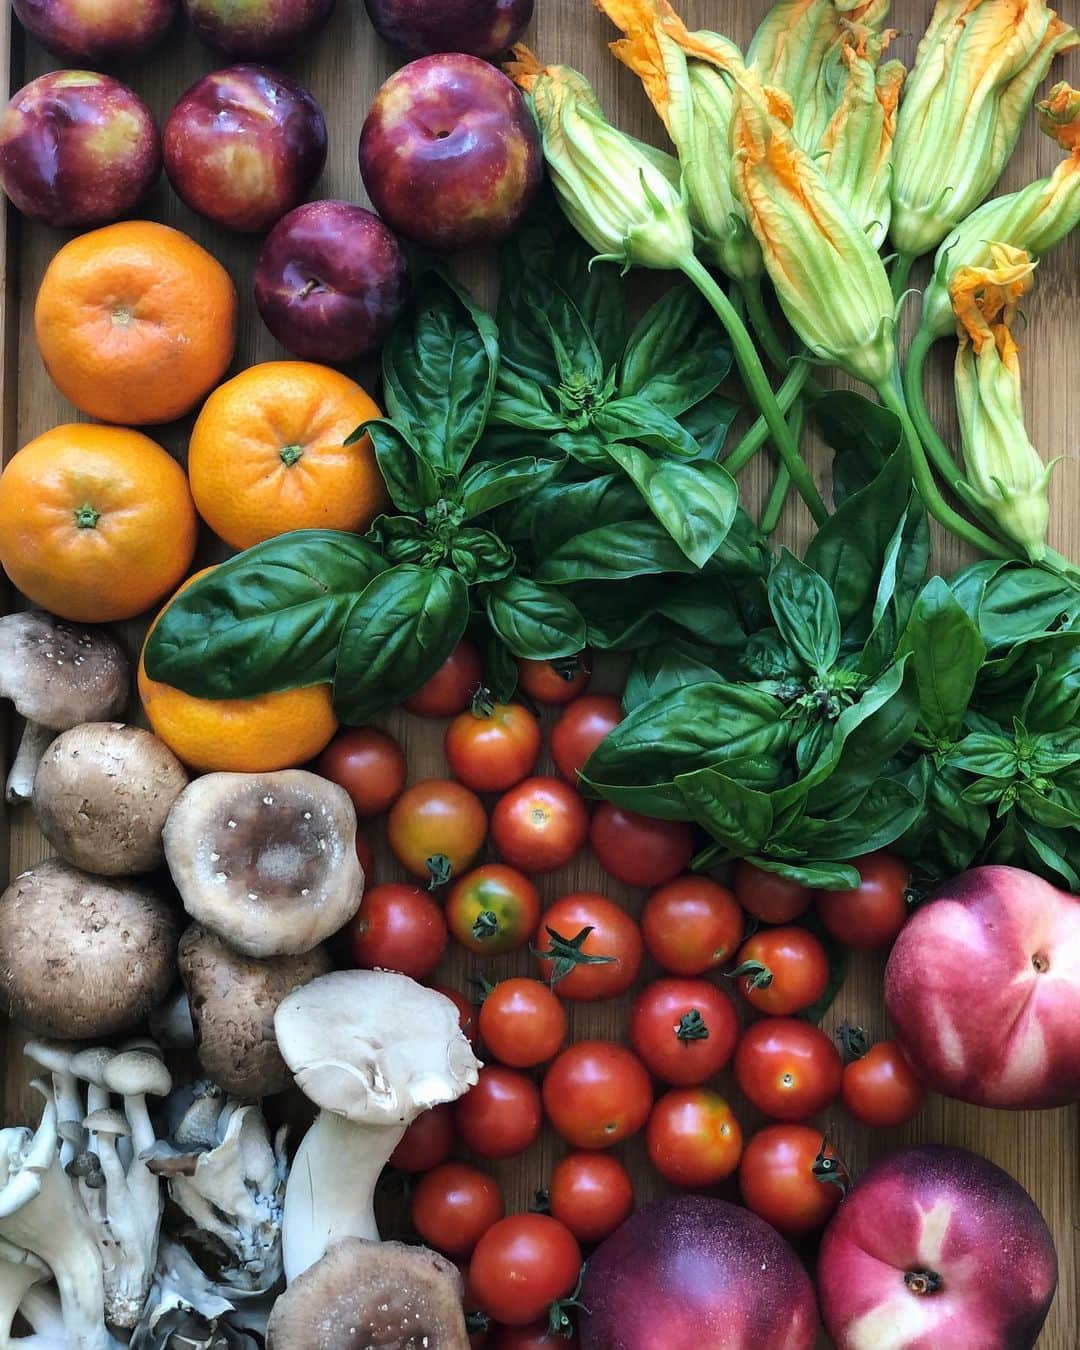 Antonietteのインスタグラム：「Farmer’s market haul. Such a nice day to go out, take a stroll and bring home some of summer’s bounty. Really felt like I was in Italy for a hot minute, lol. Haven’t been to the Little Italy Mercato since the pandemic and was pleased to see social distancing, enforcement of proper mask 😷 wearing and sanitation practices in place. Buon Sabato! ☀️ 🇮🇹」